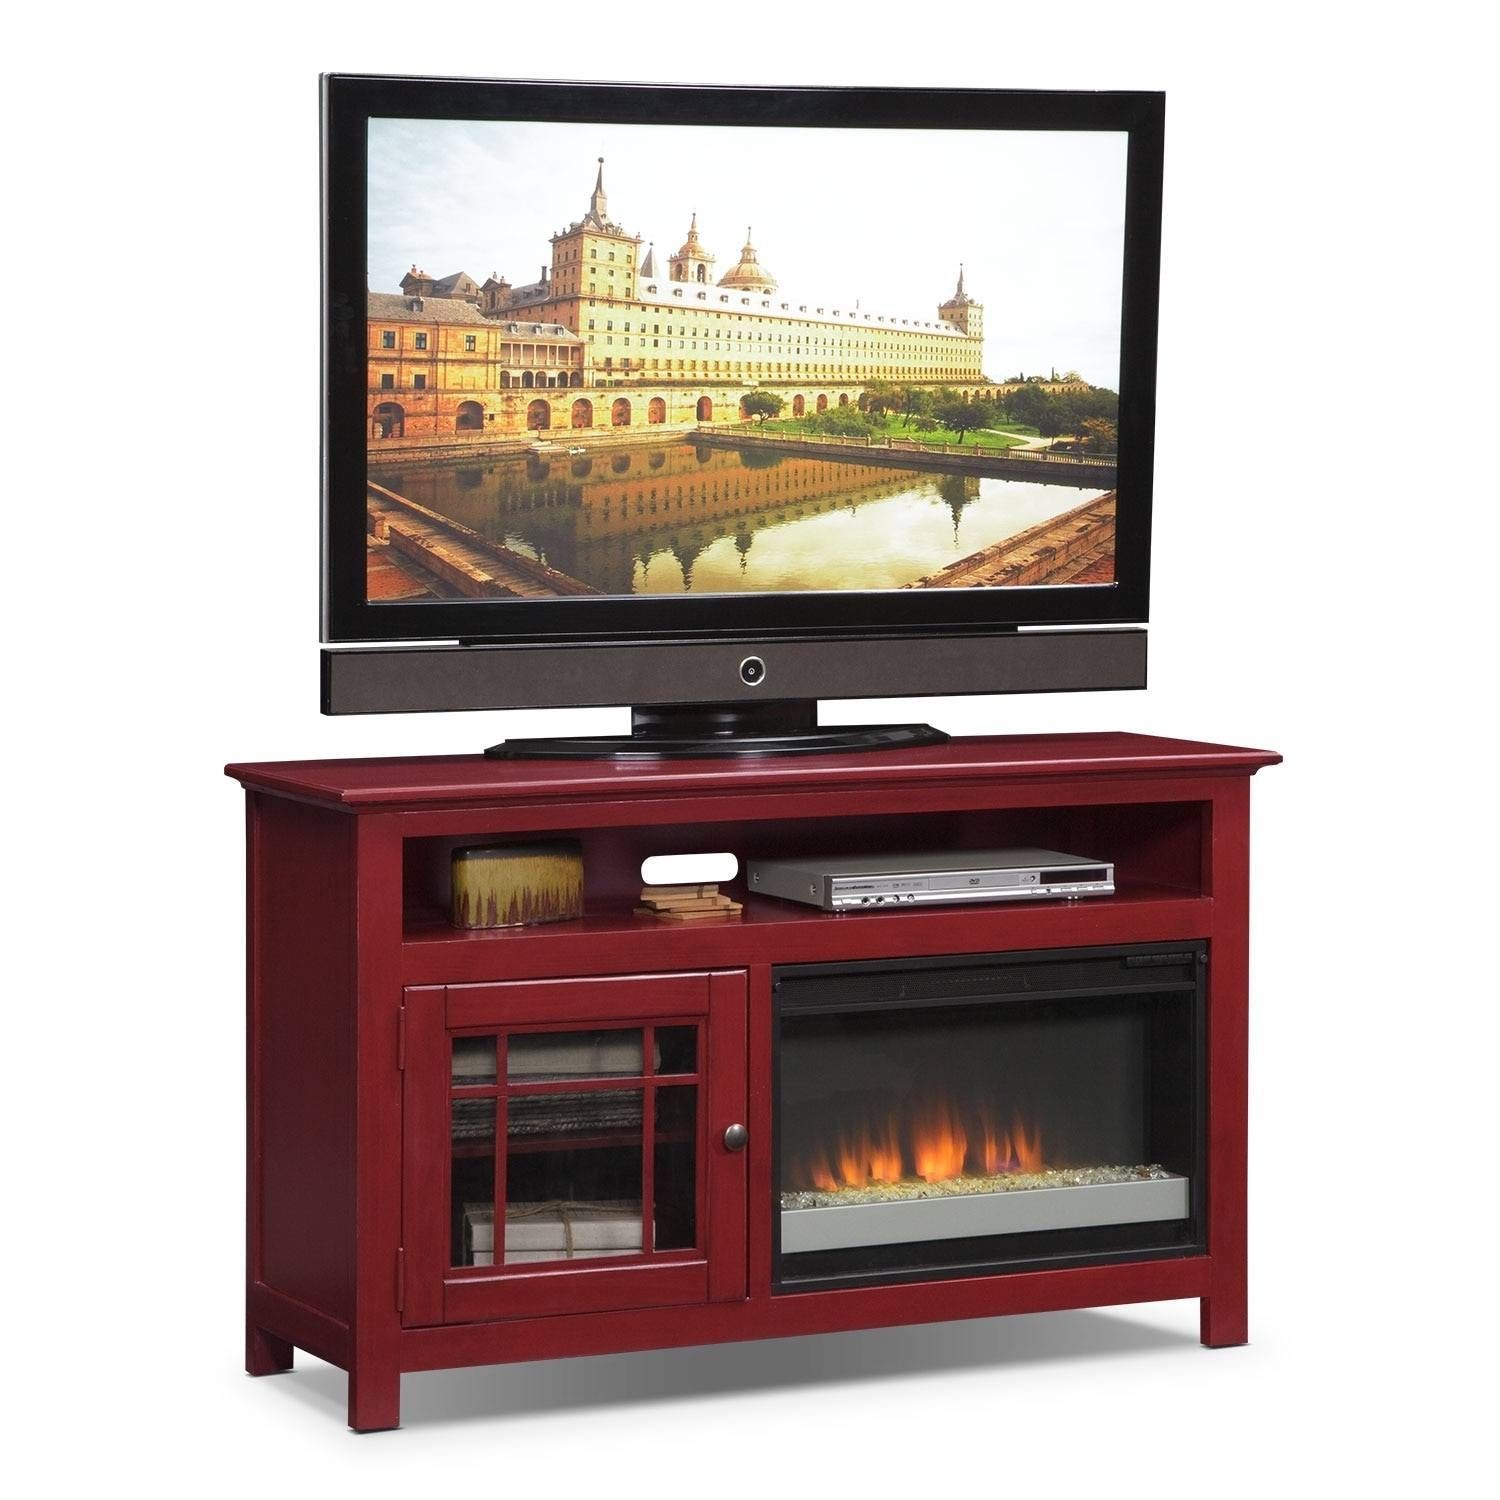 T V Stands & Media Centers | Value City Furniture In Rustic Red Tv Stands (View 11 of 15)